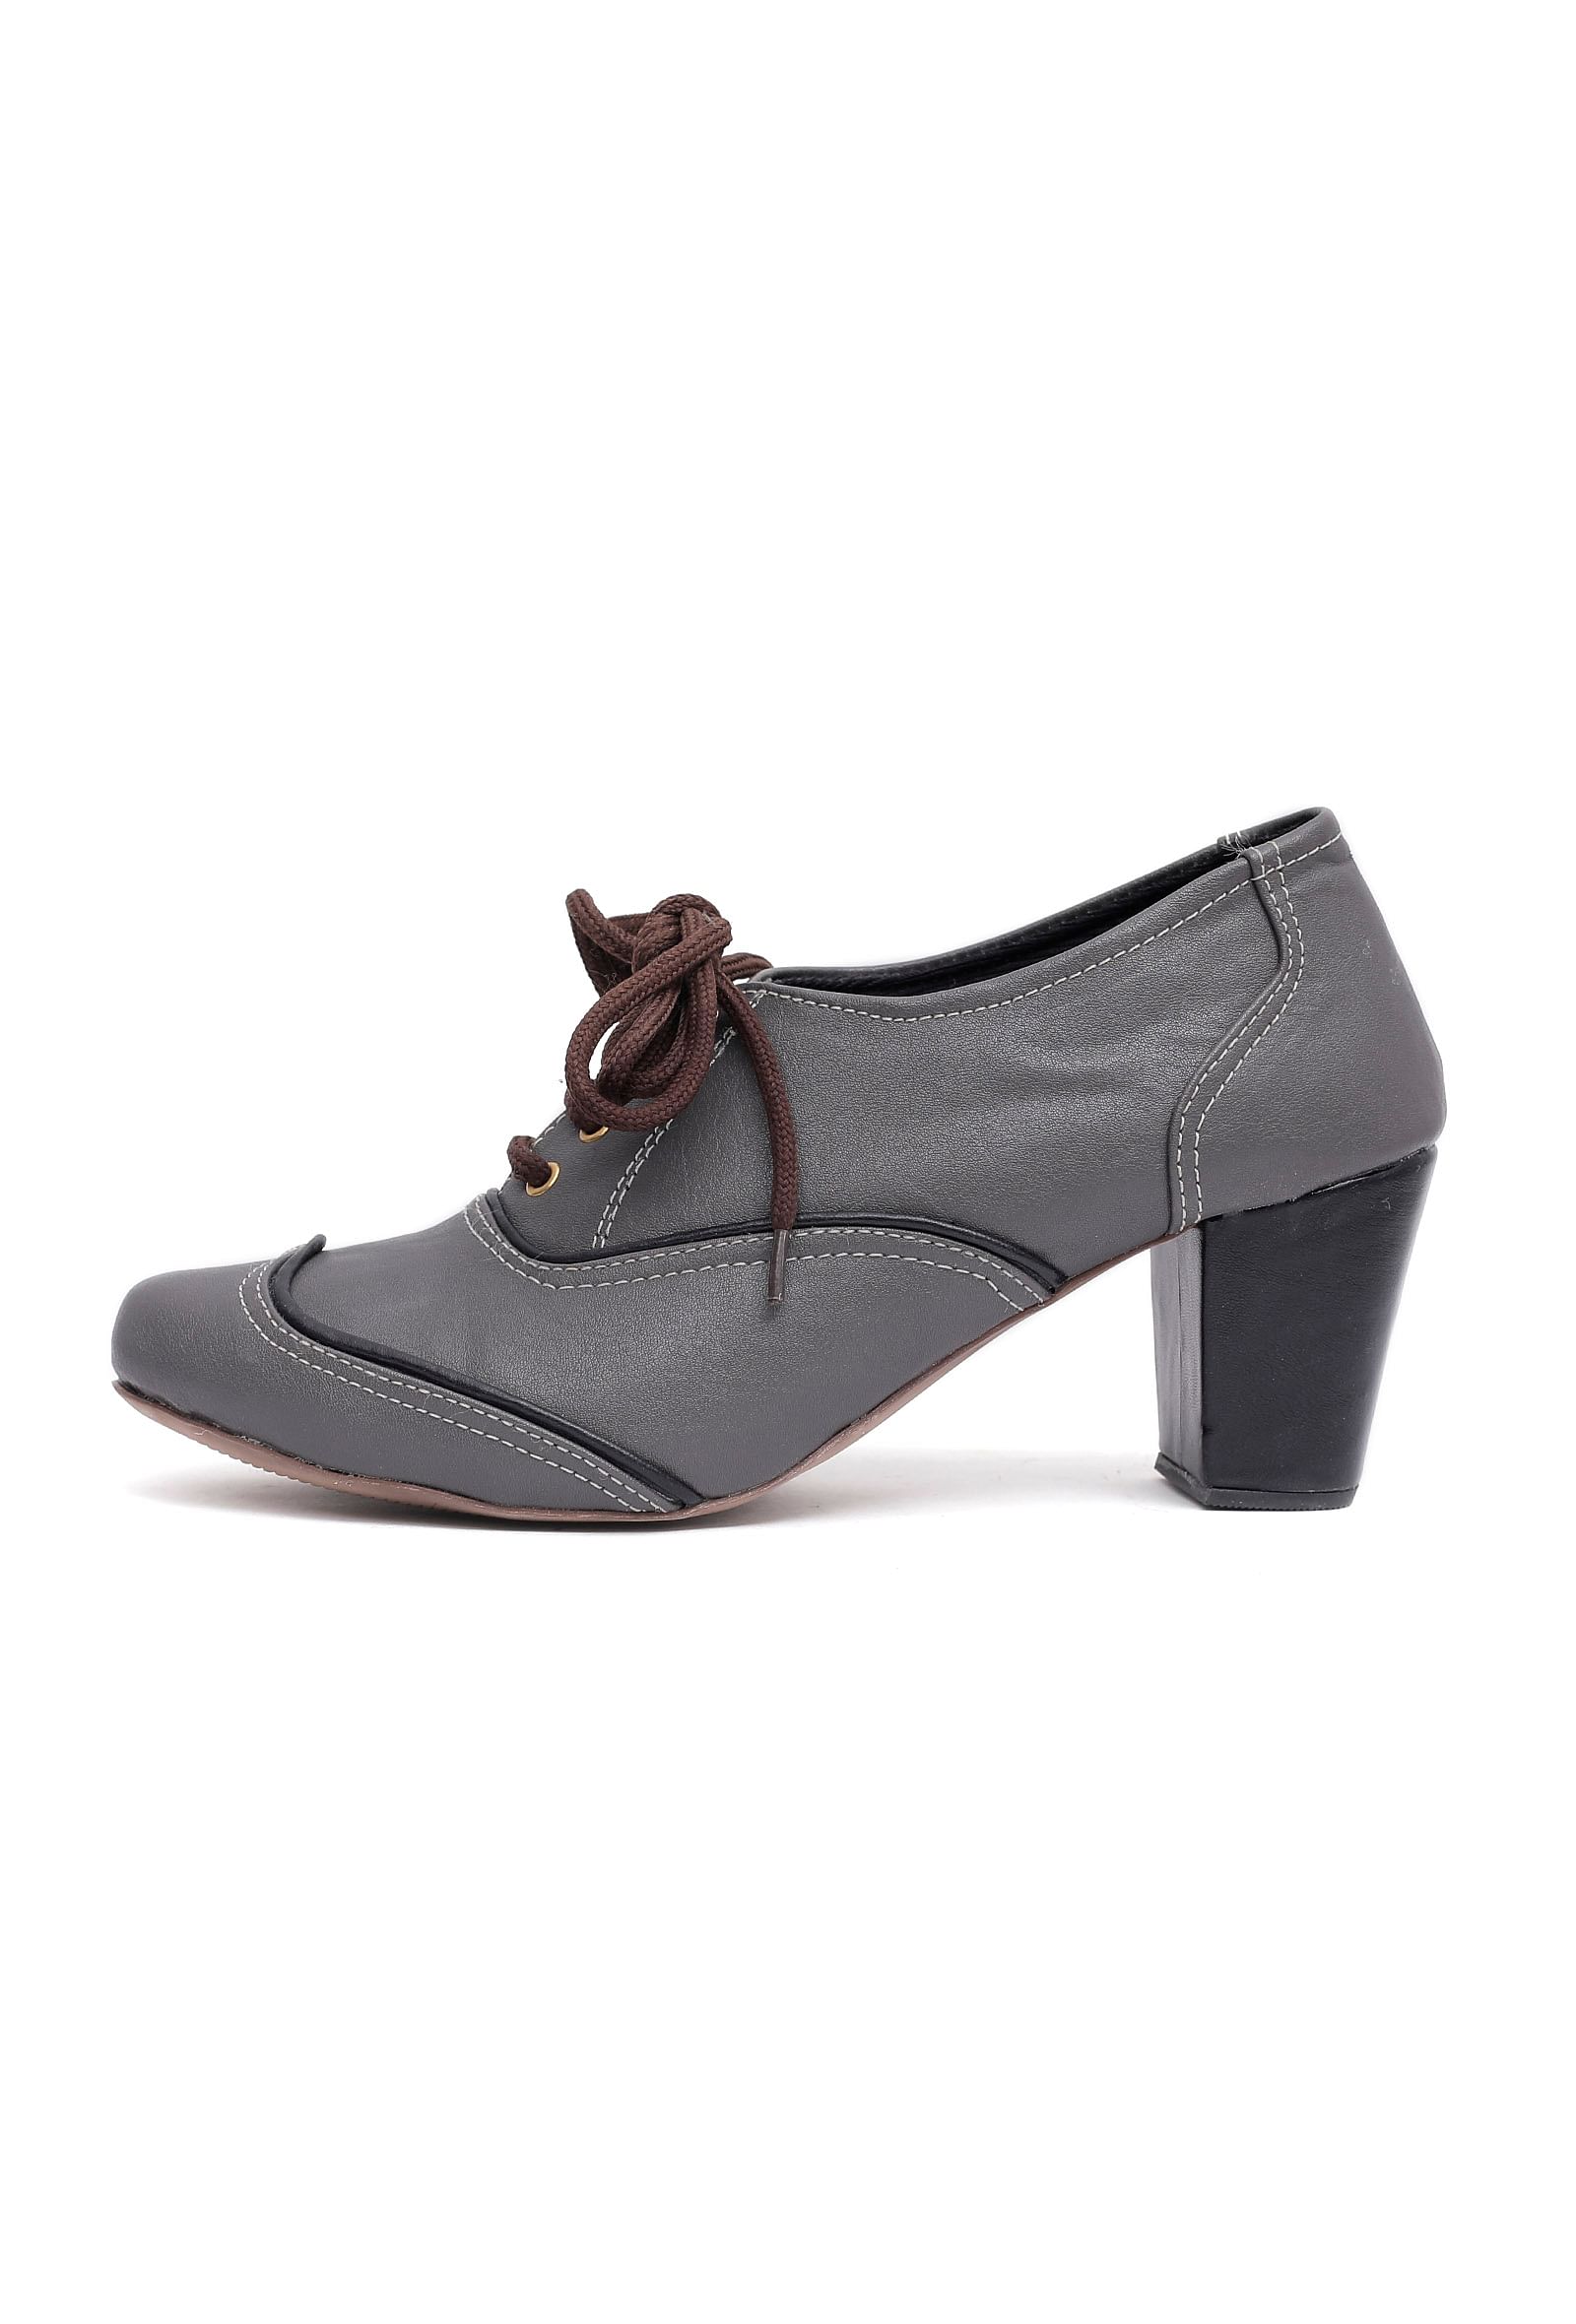 Dove Grey Cruelty Free Leather Oxford Heel Boots